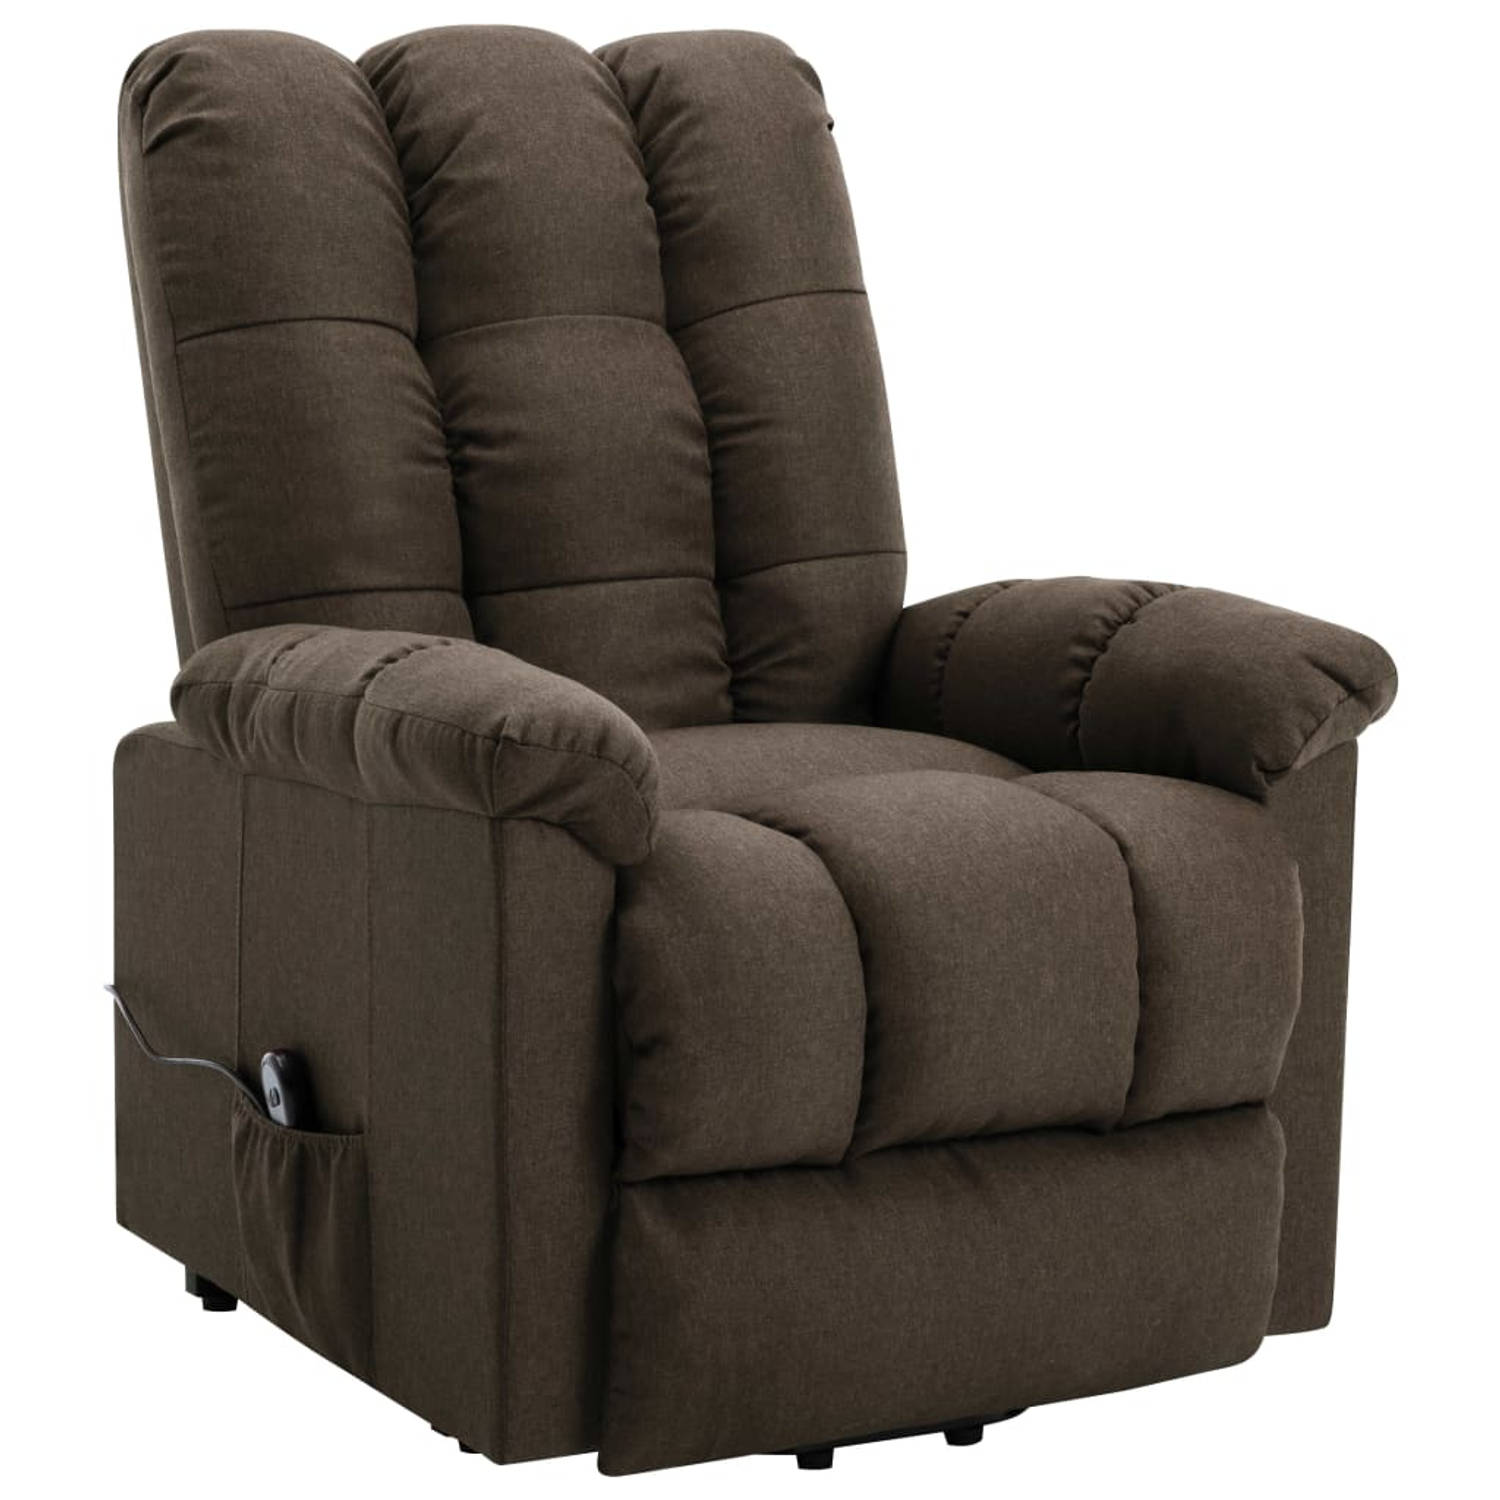 The Living Store Sta-op-stoel stof bruin - Fauteuil